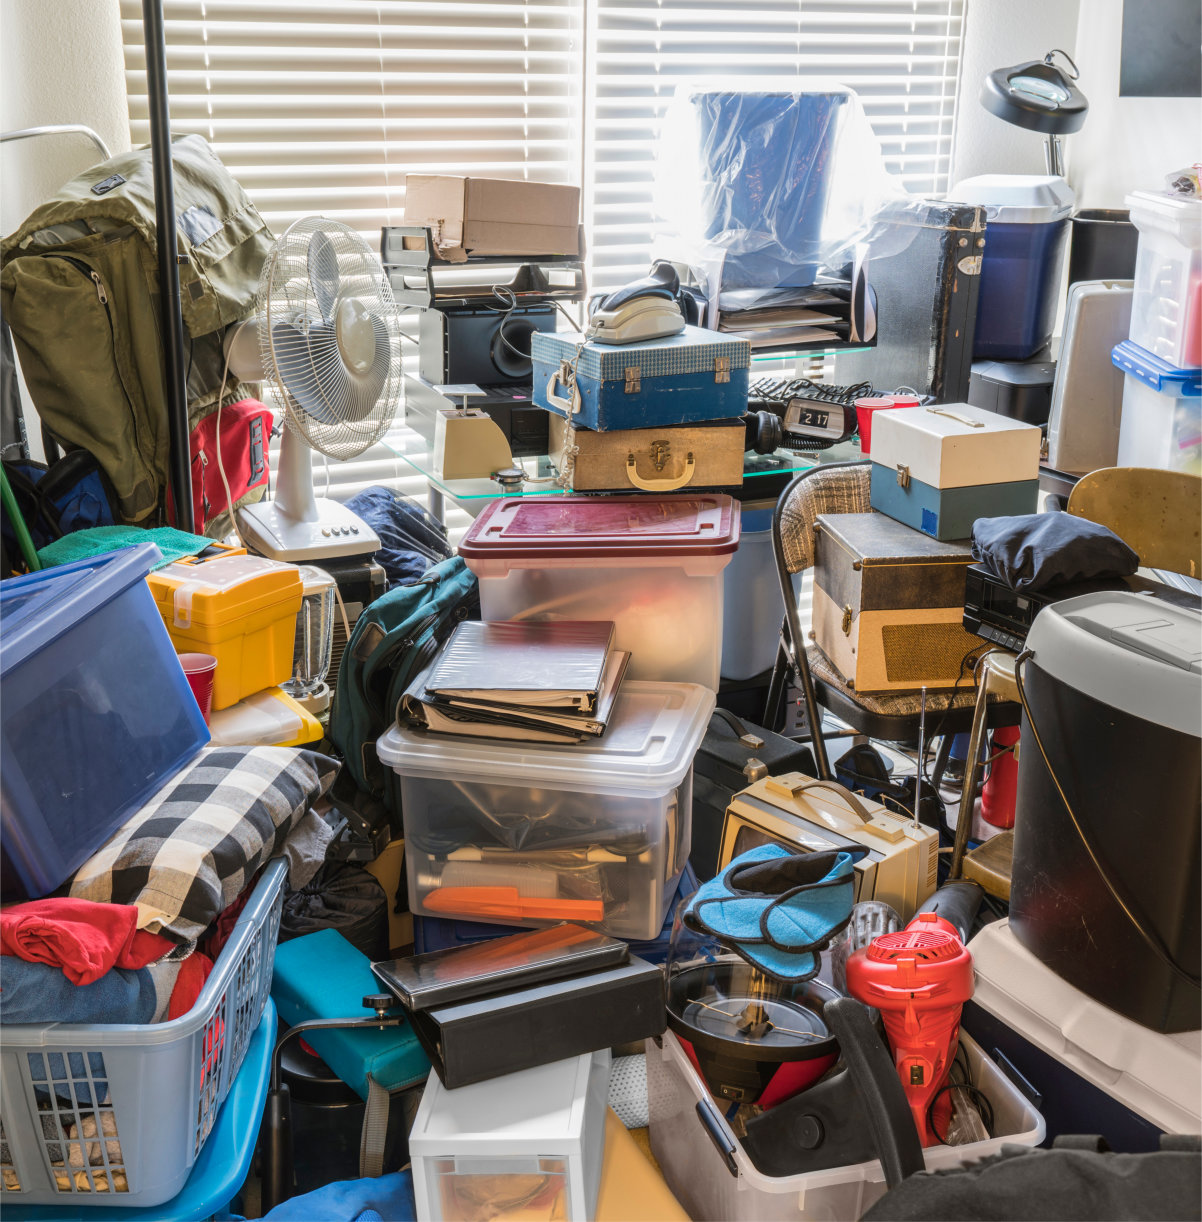 Hoarder,Room,Packed,With,Boxes,,Electronics,,Business,Equipment,,Household,Objects